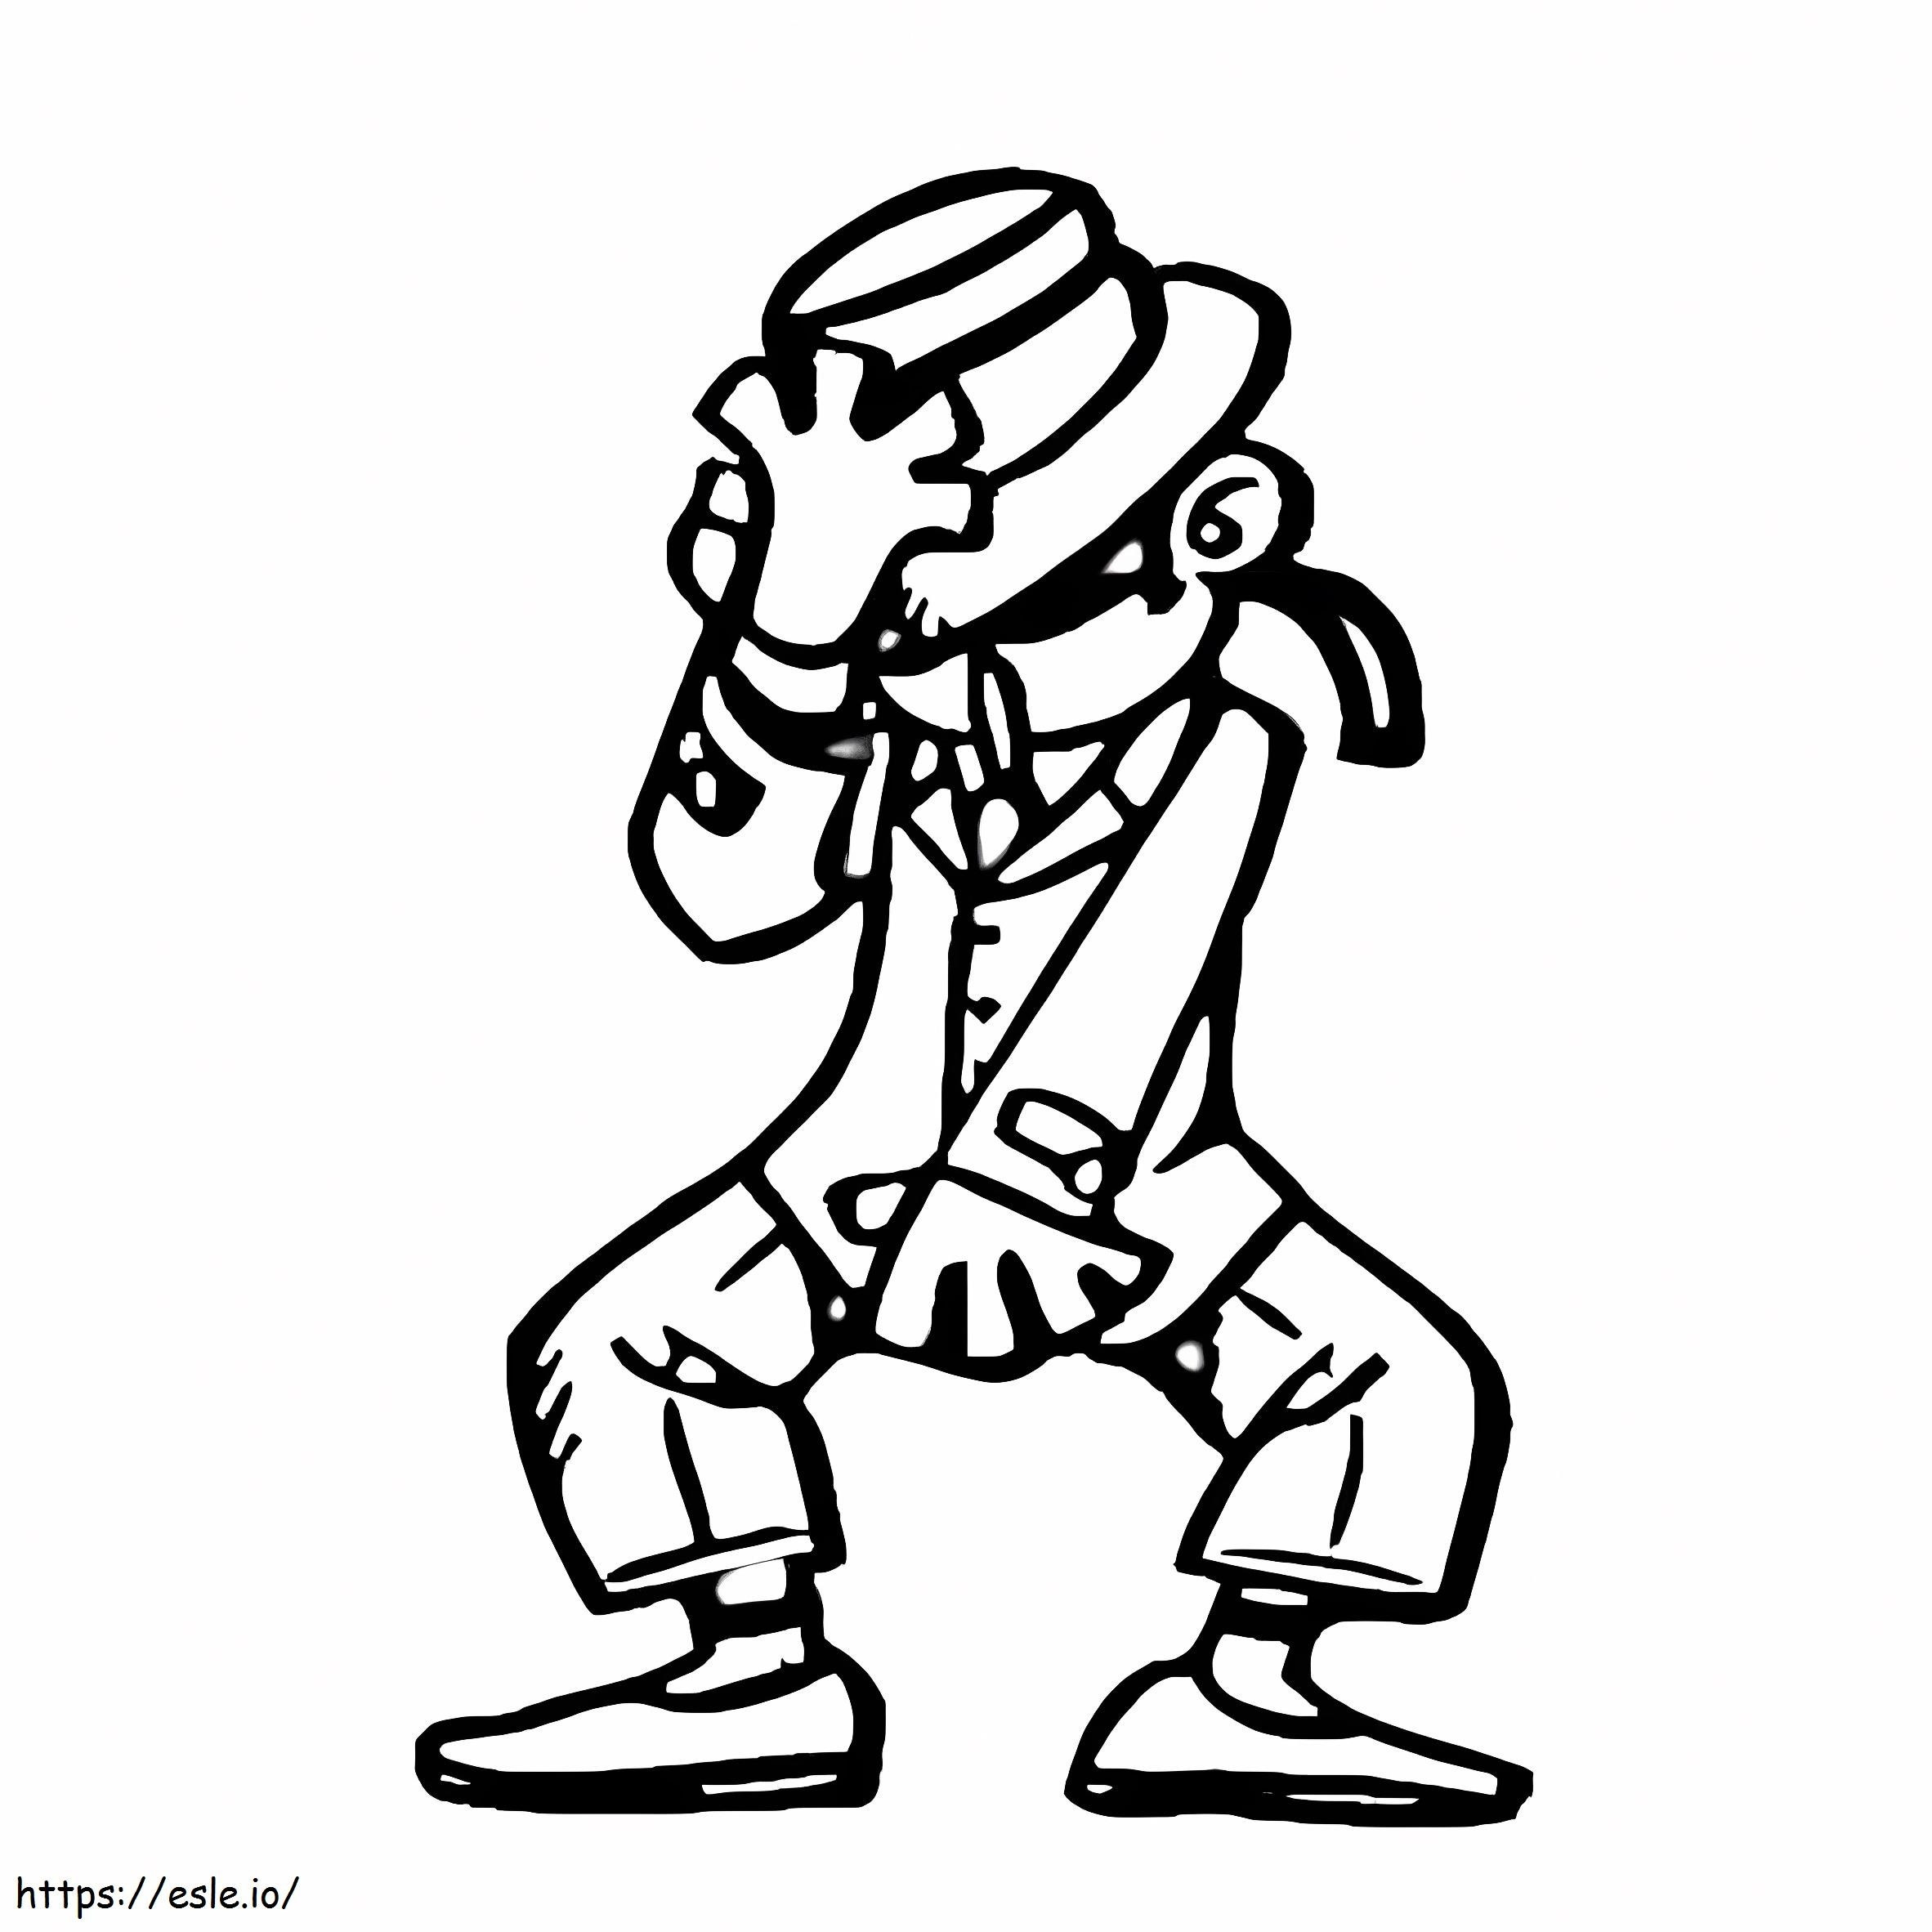 Dancer 2 coloring page